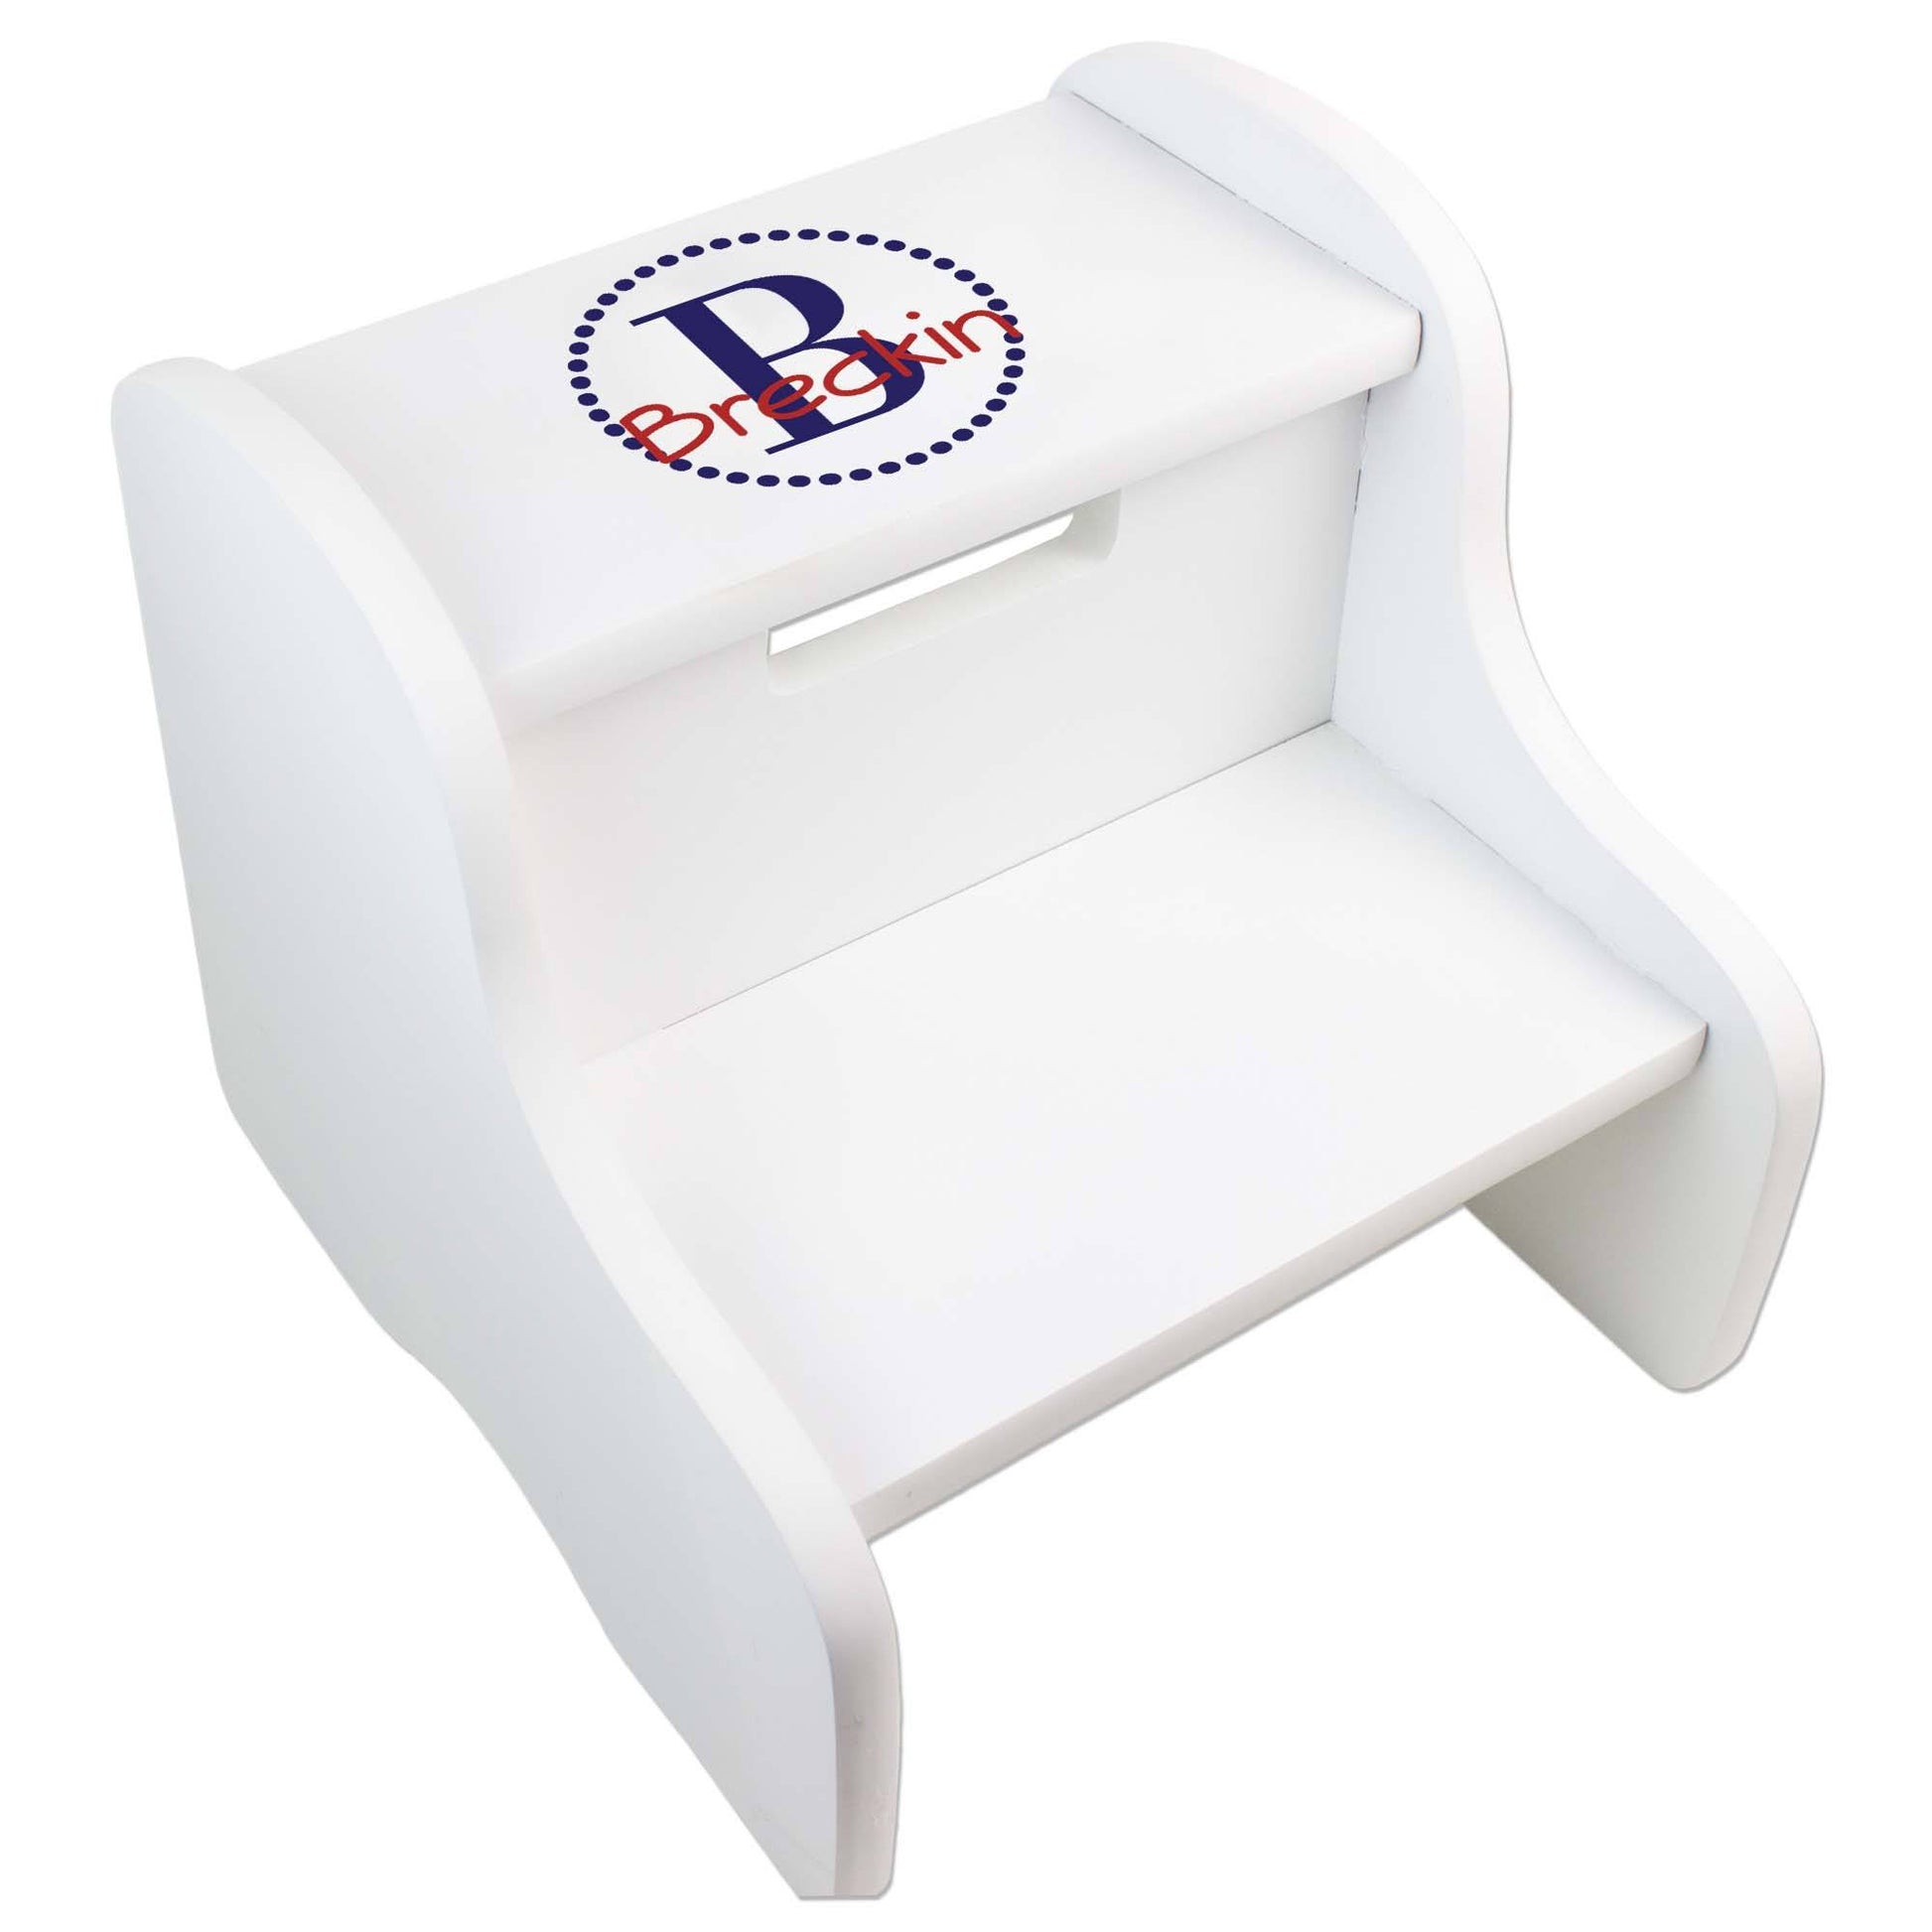 Personalized White Fixed Stool With Navy Circle Design